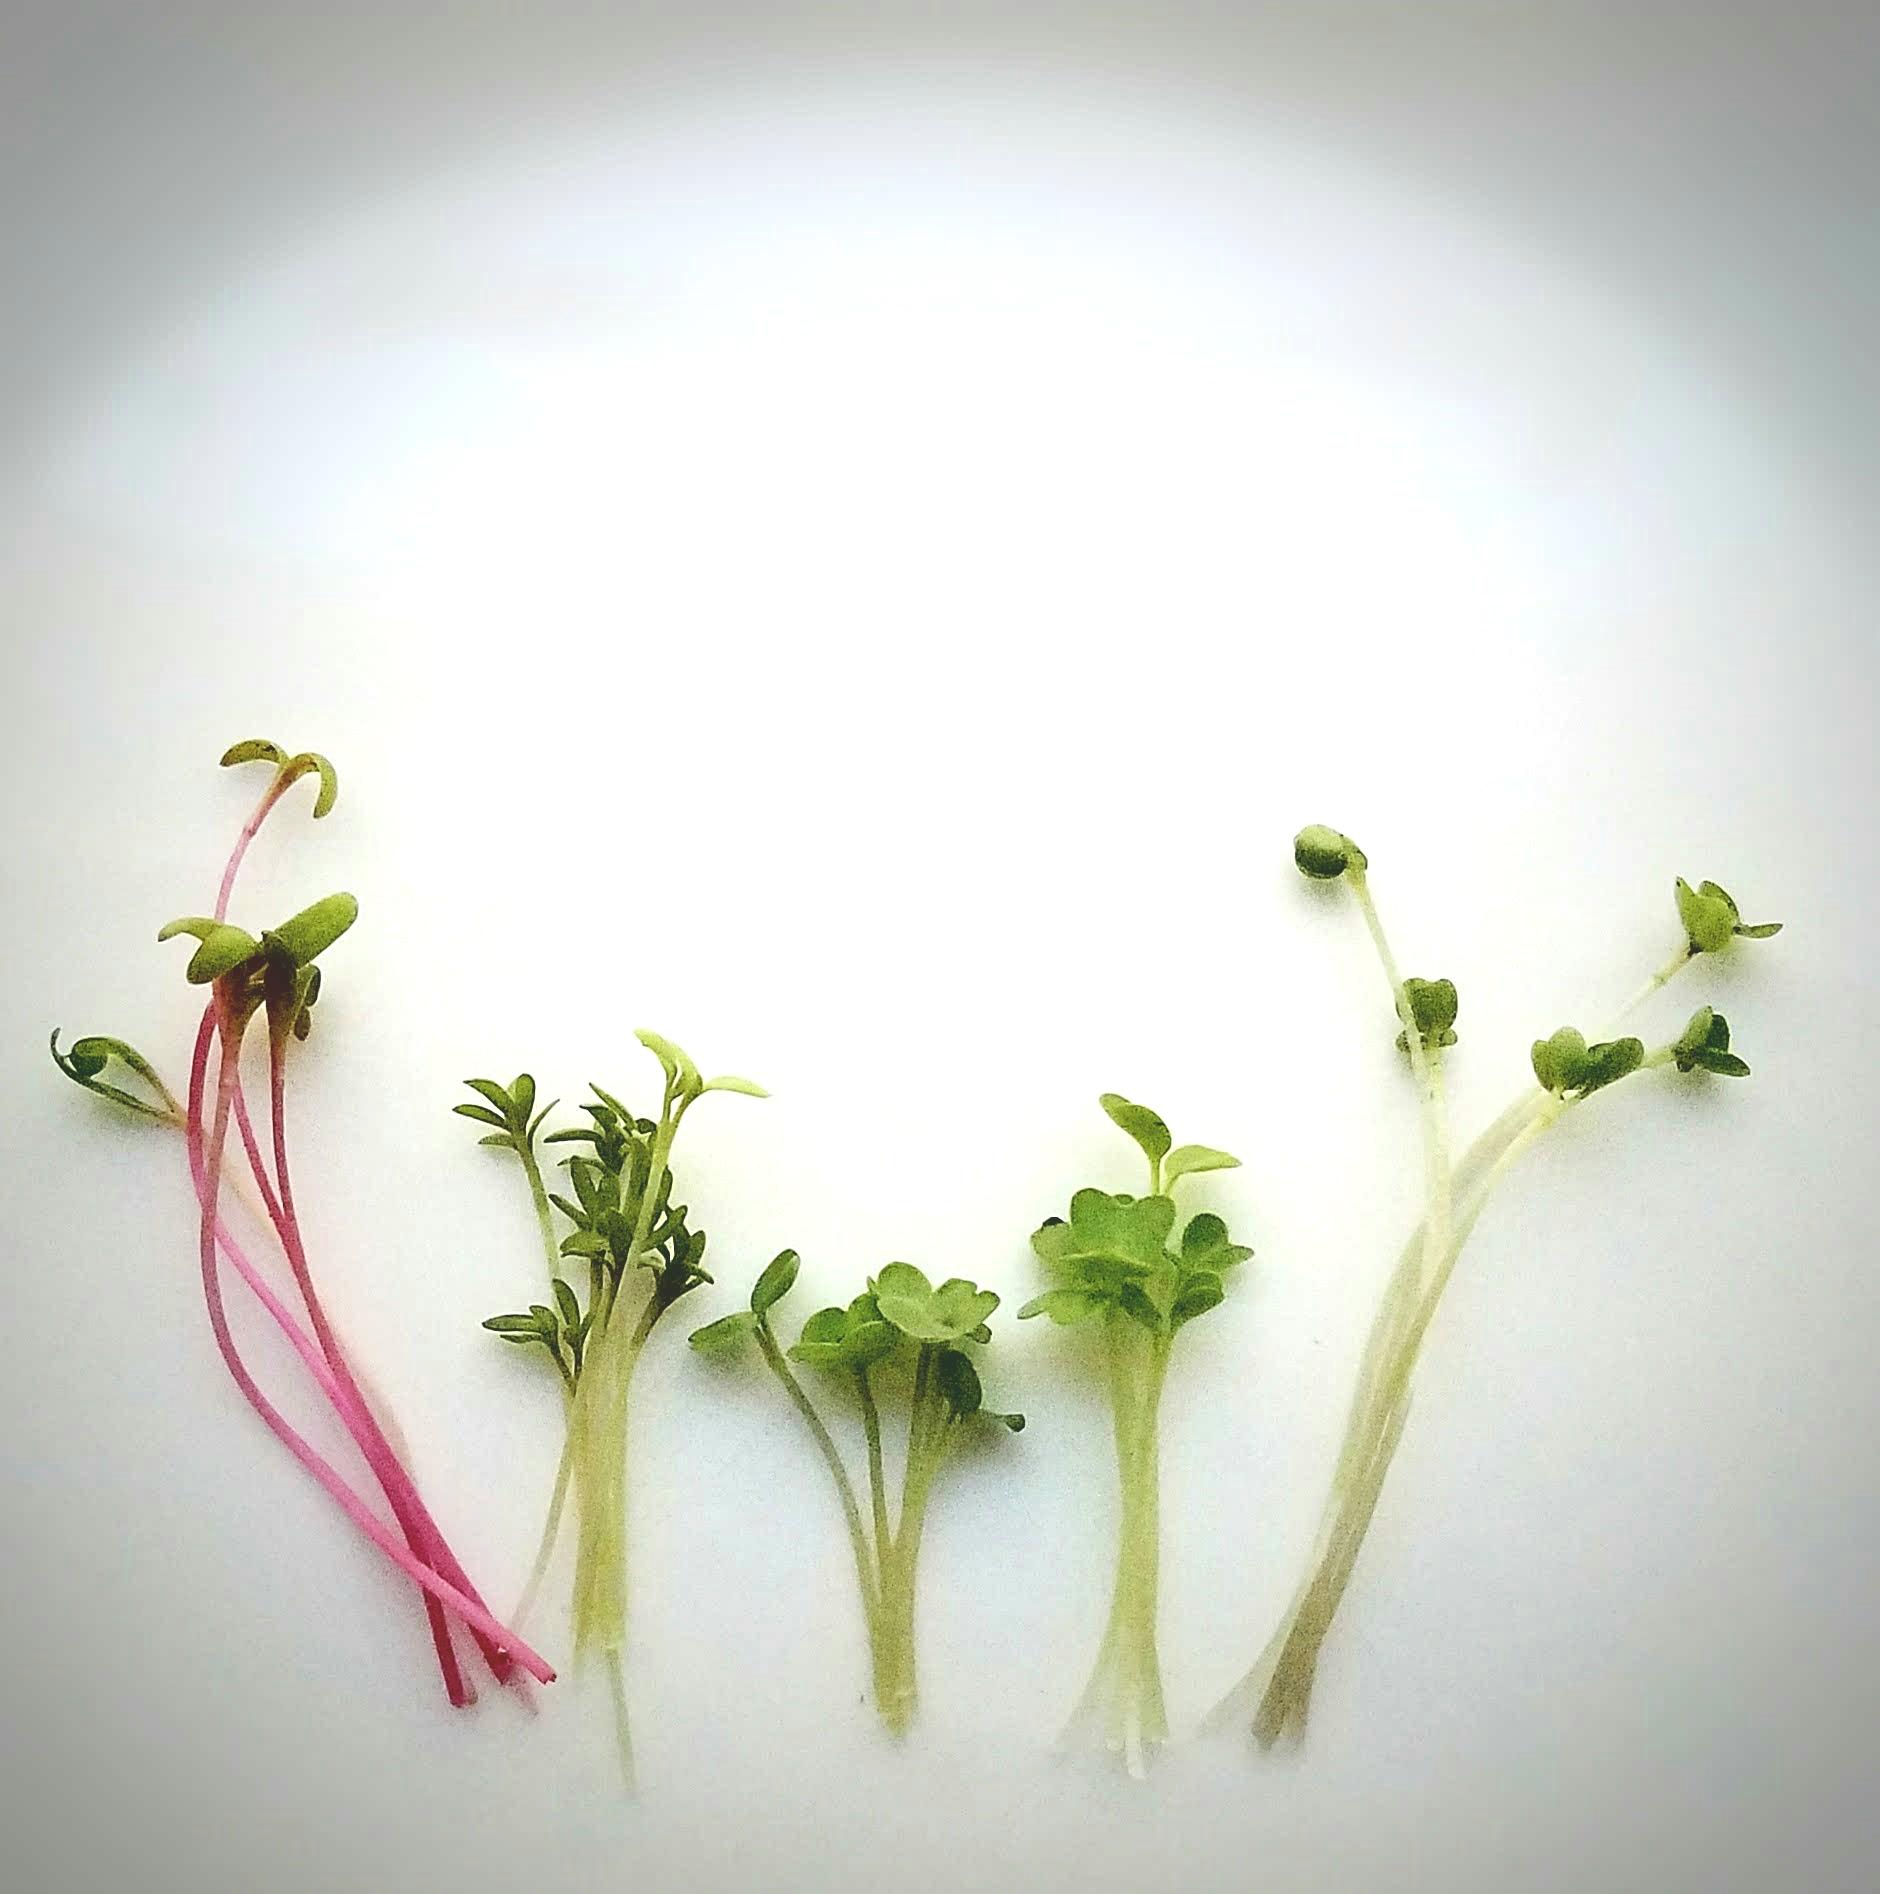 Cabbage family microgreen tasting & How to grow